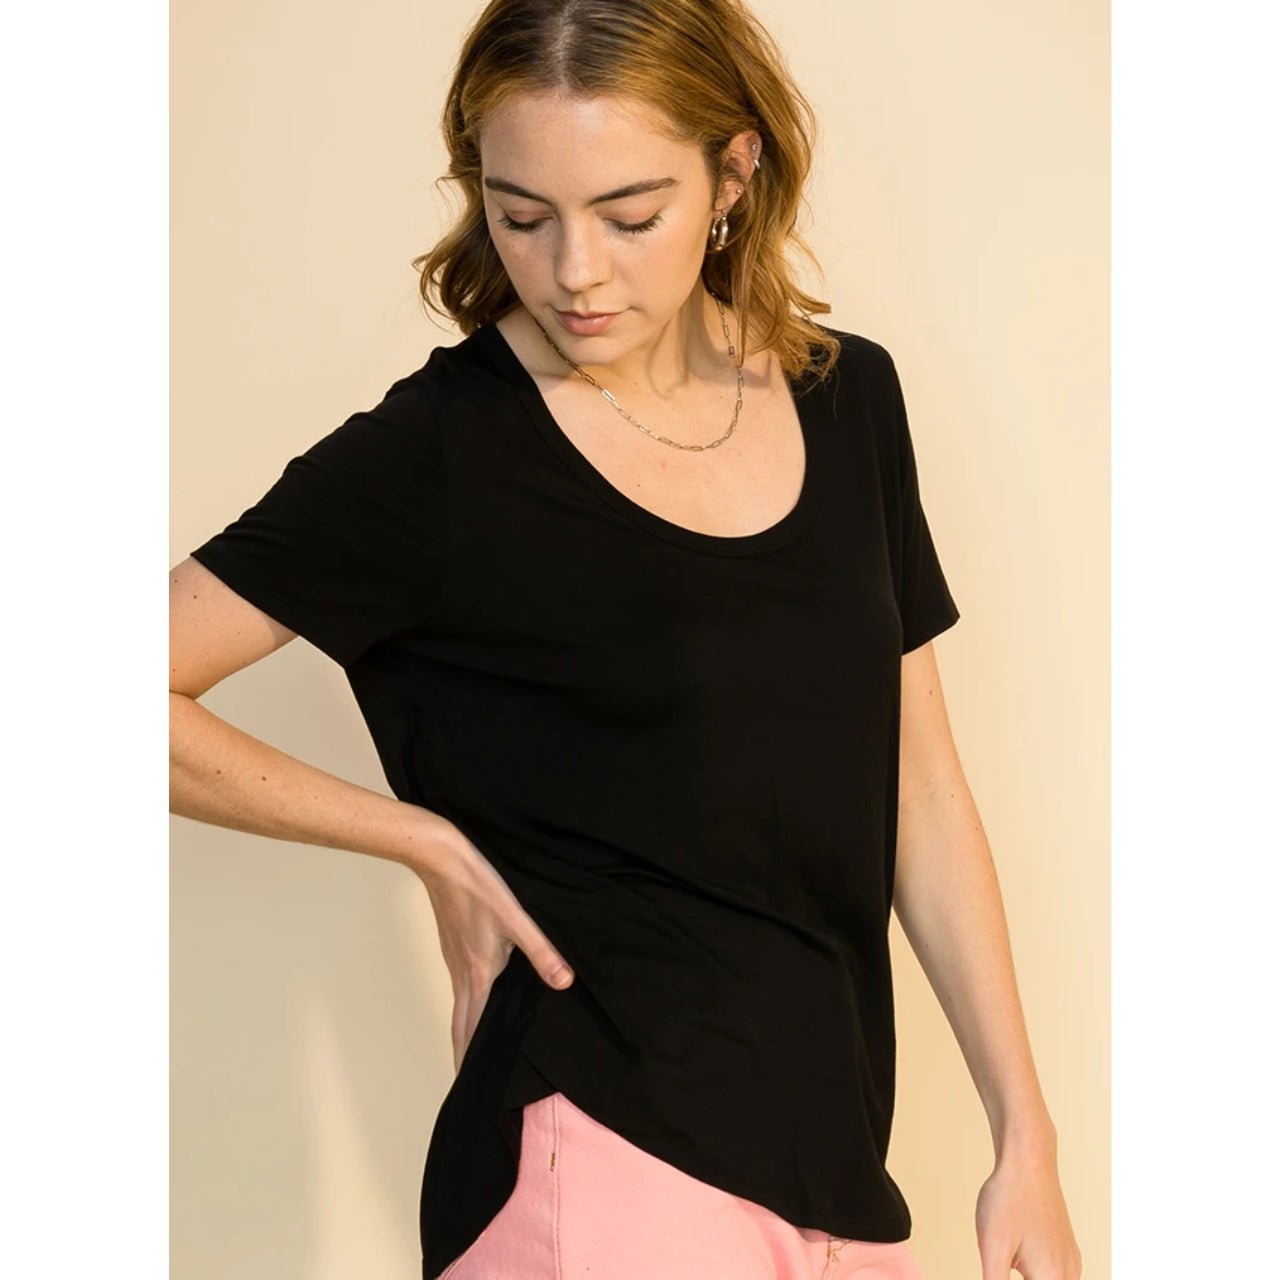 Scoop Neck Basic Tee with Back Seam Detail - The Graphic Tee